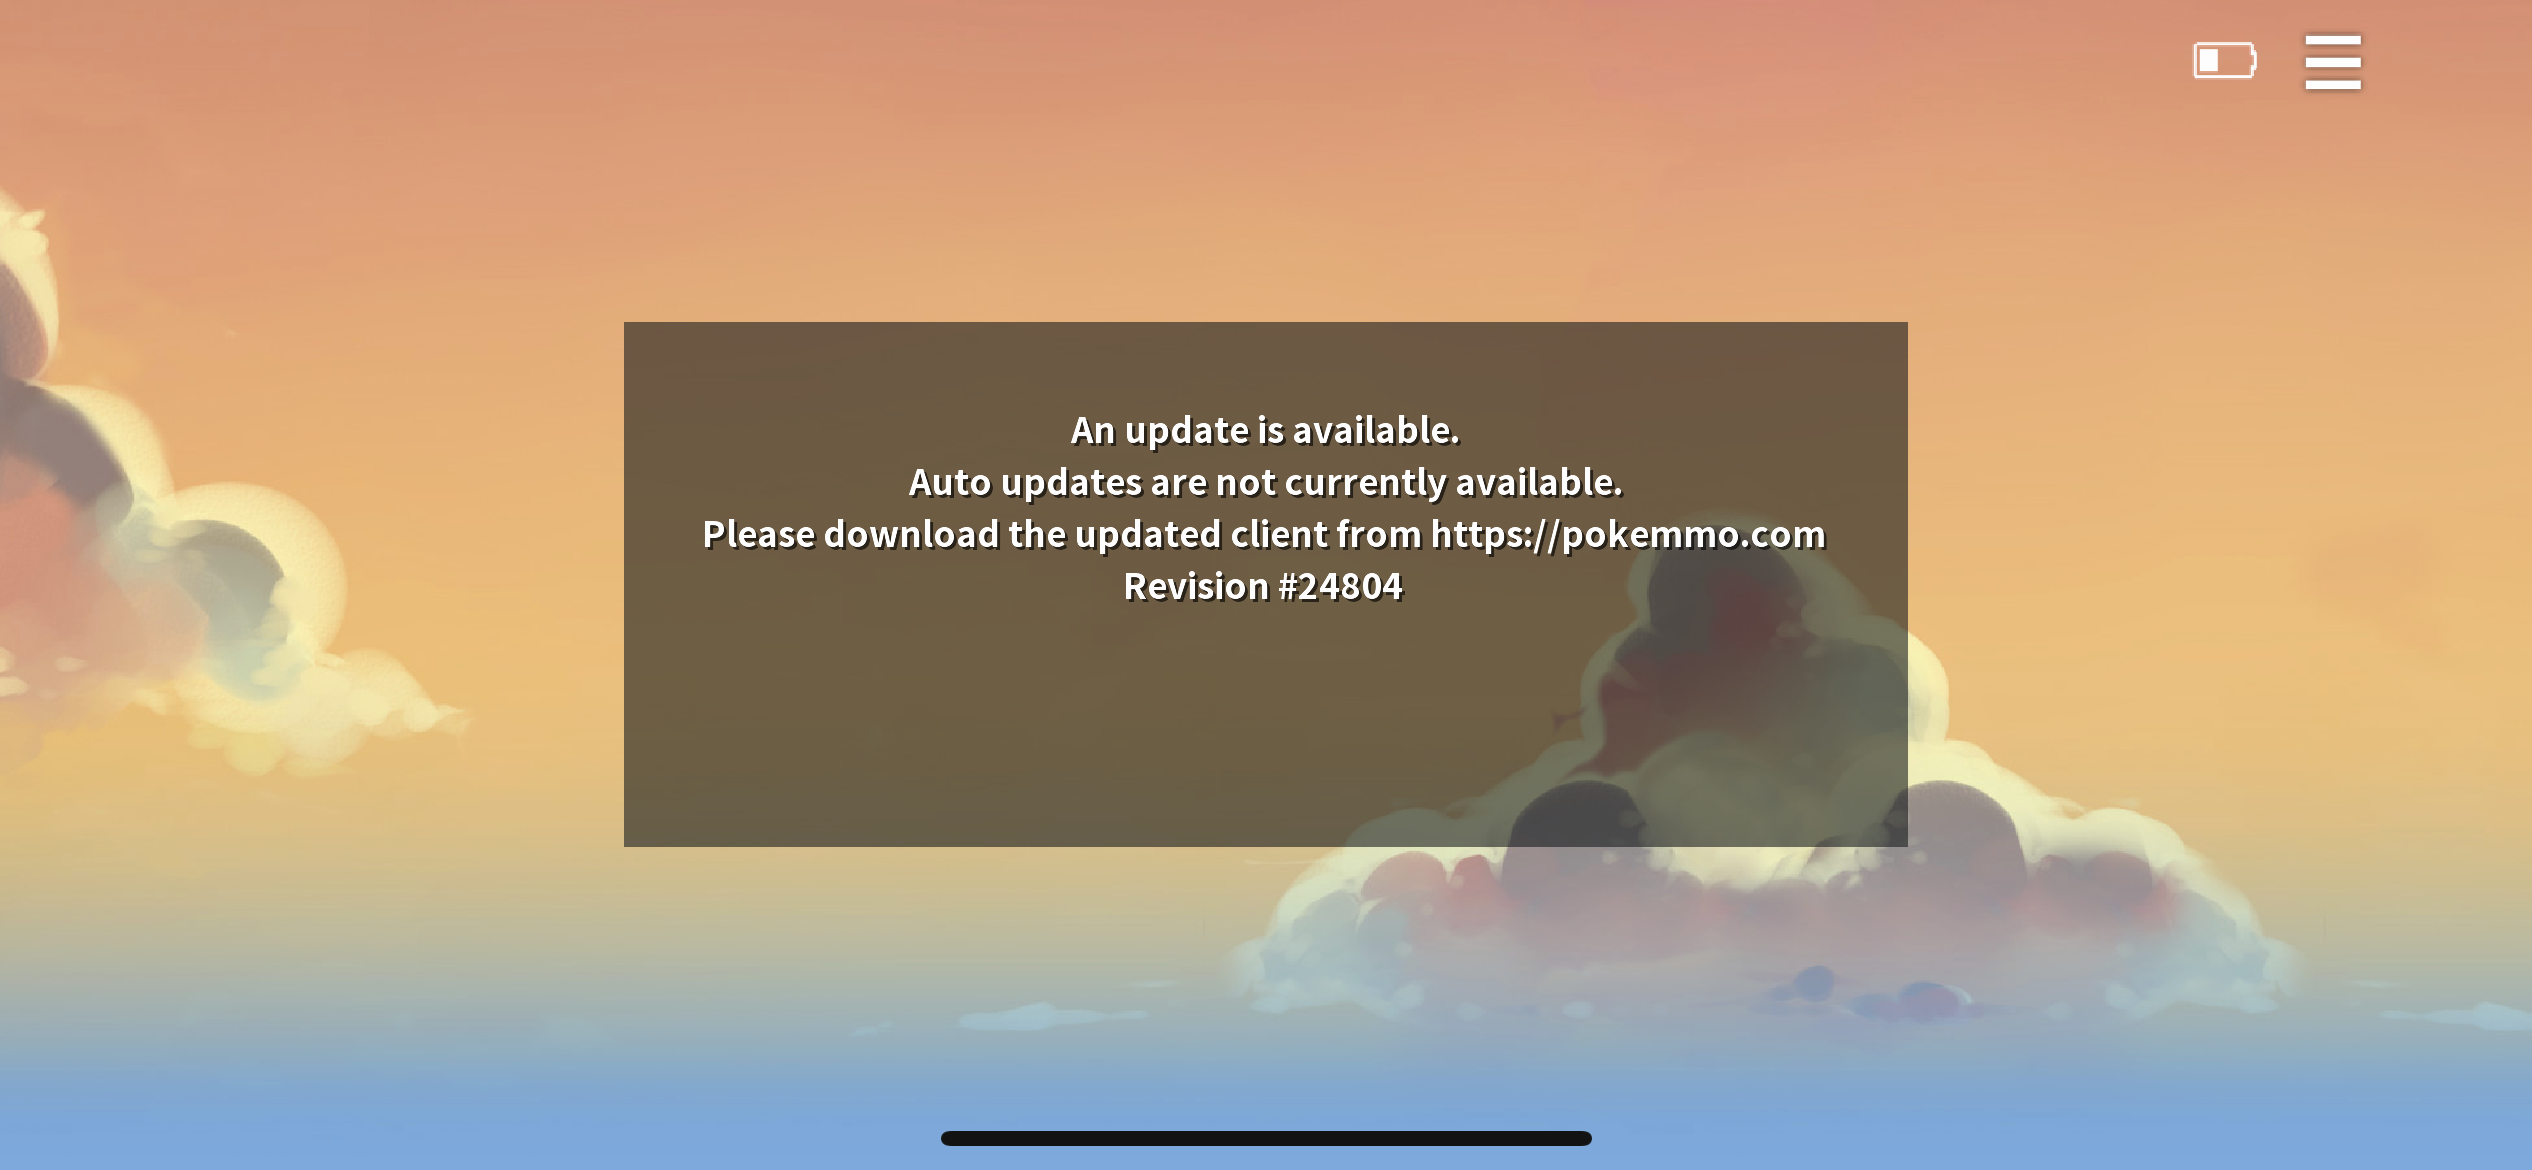 How To Get PokeMMO On iPhone Guide Here >